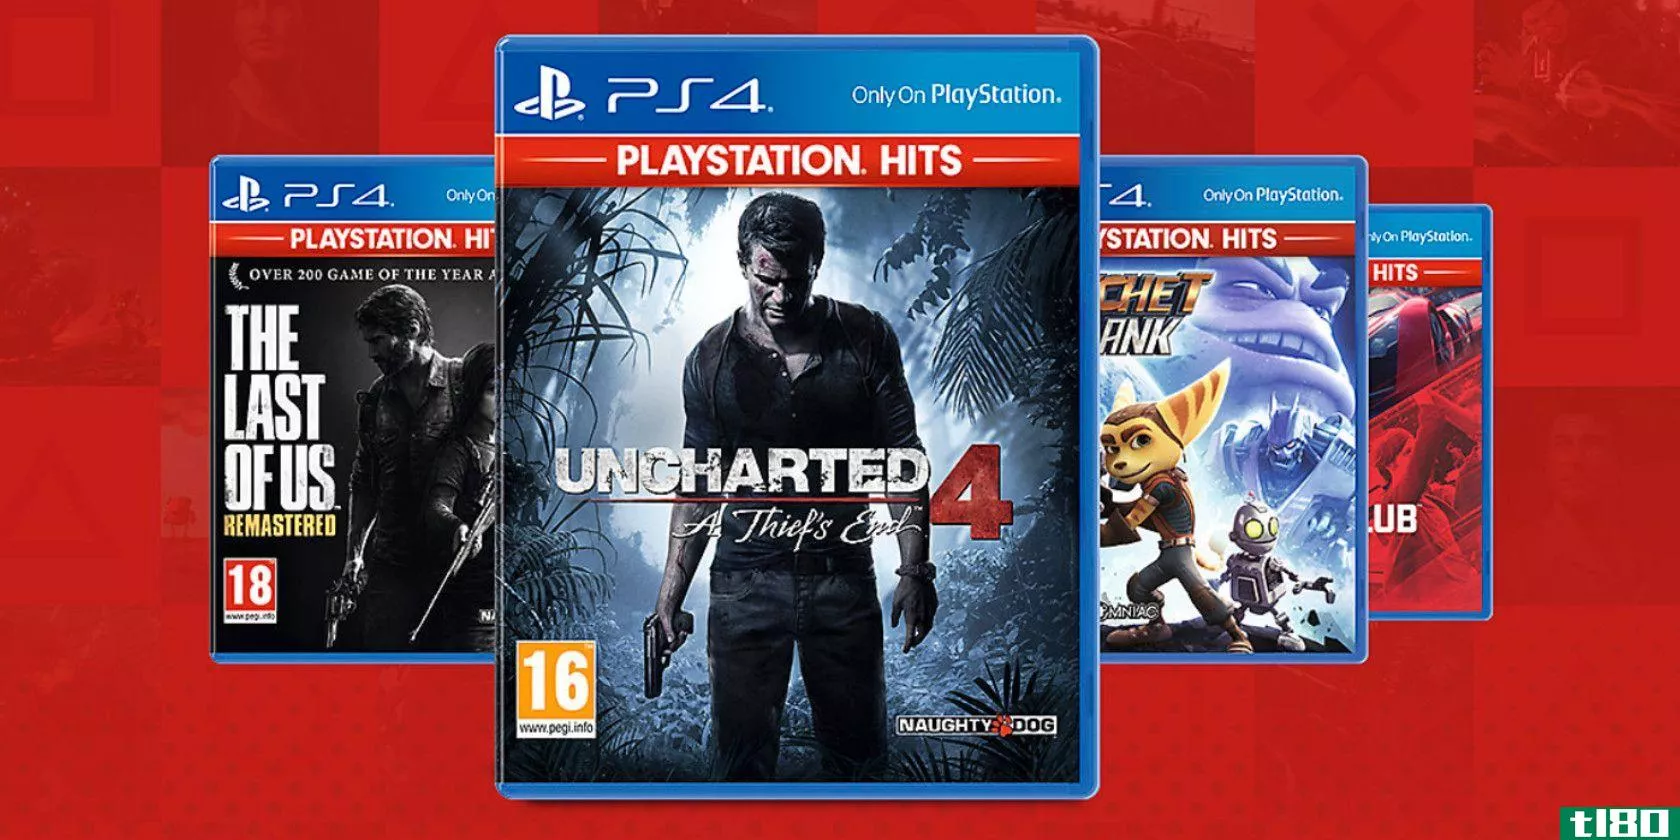 Selection of PlayStation 4 games